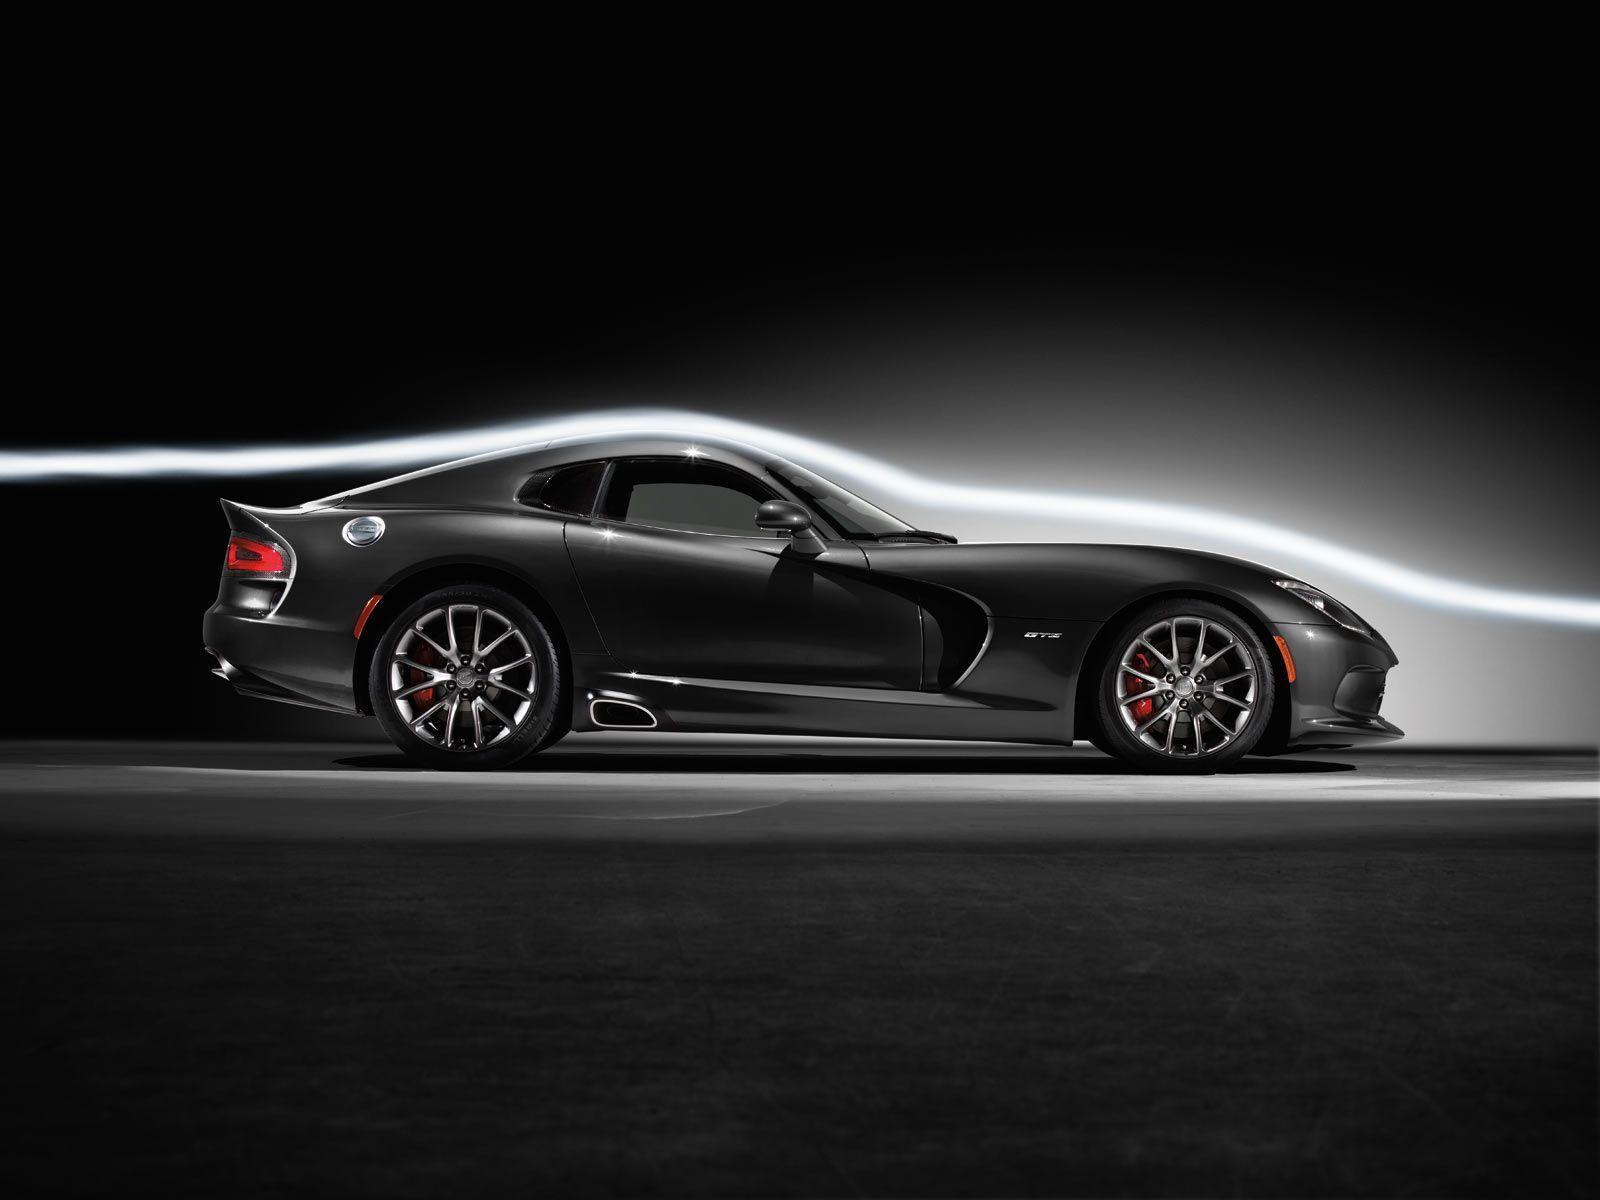 Dodge Viper 2016 Gts Best Wallpaper About Gallery Car